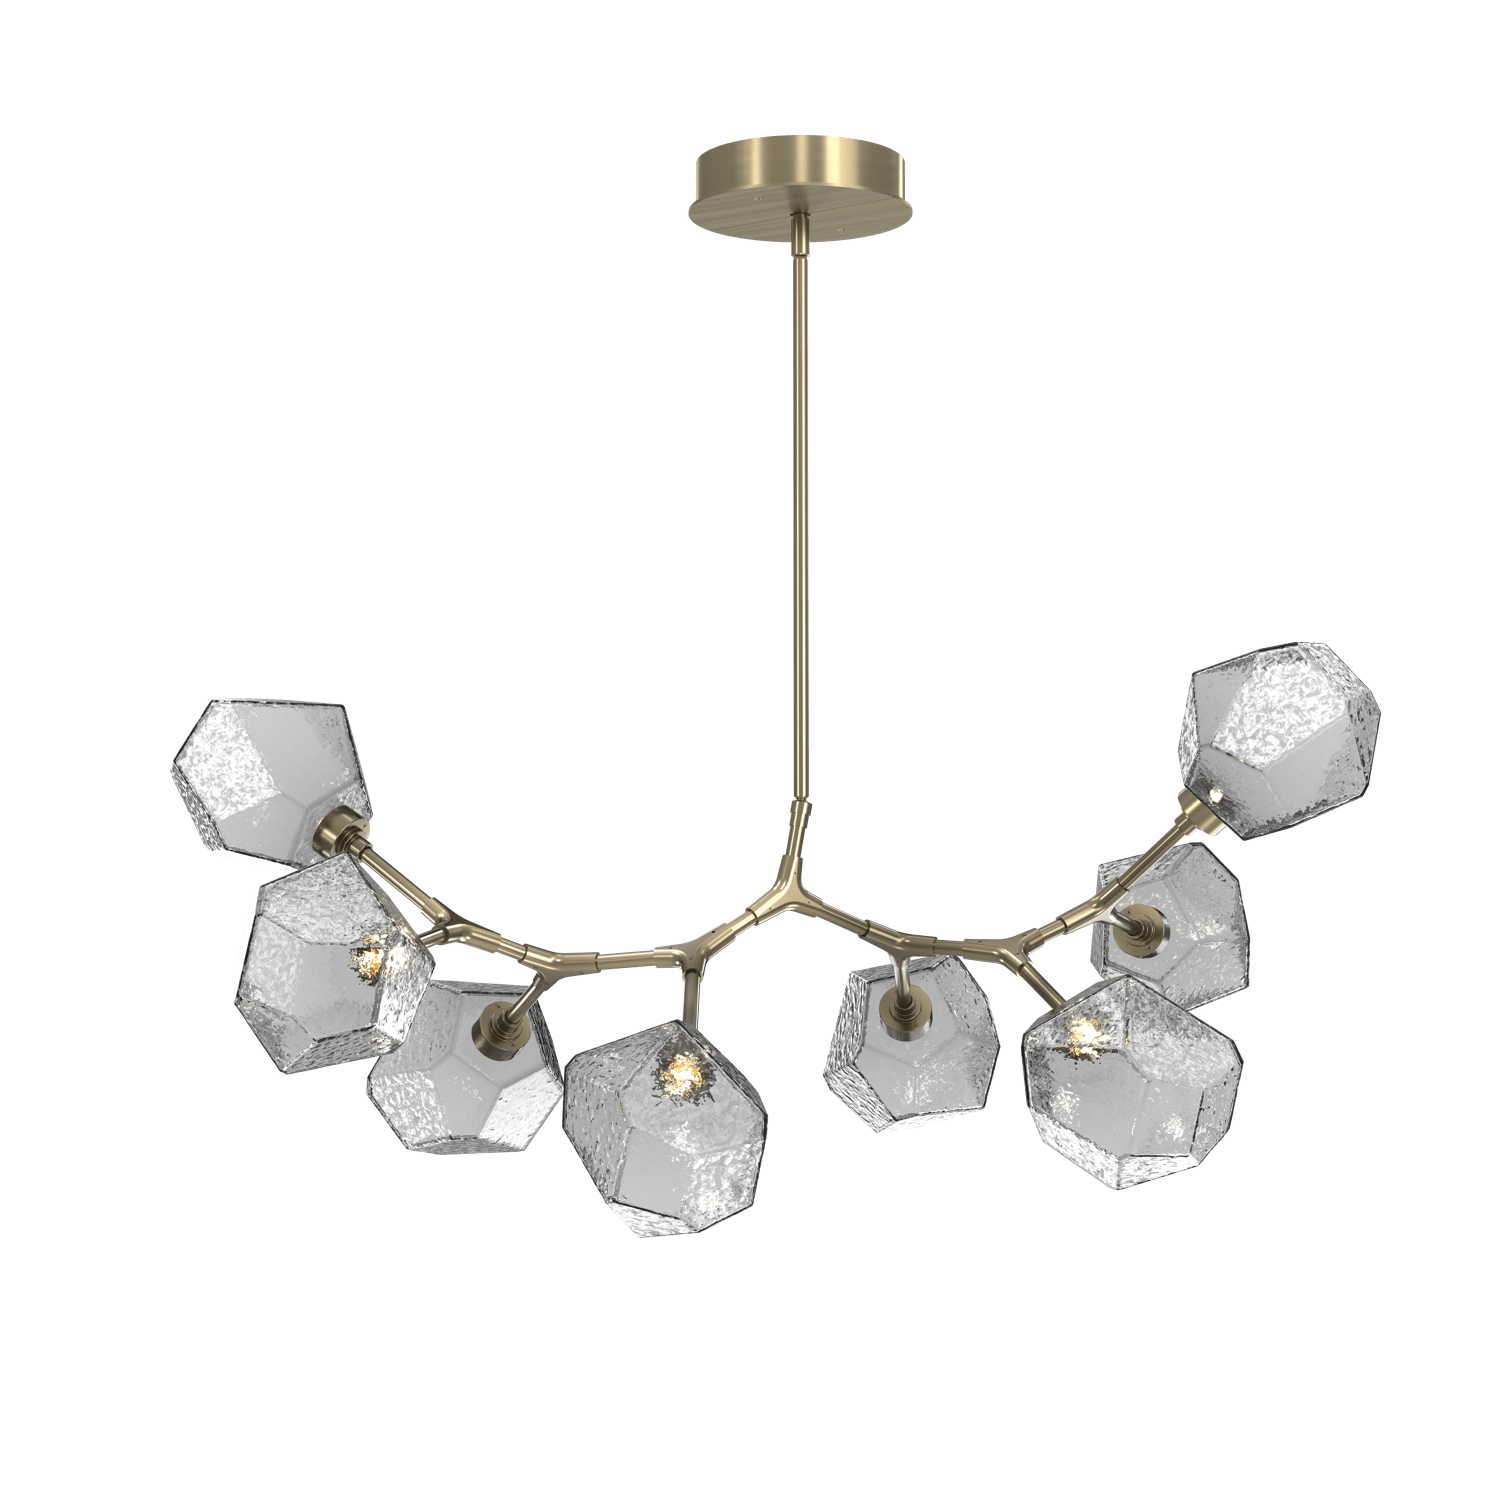 PLB0039-BB-HB-S-Hammerton-Studio-Gem-8-light-modern-branch-chandelier-with-heritage-brass-finish-and-smoke-blown-glass-shades-and-LED-lamping